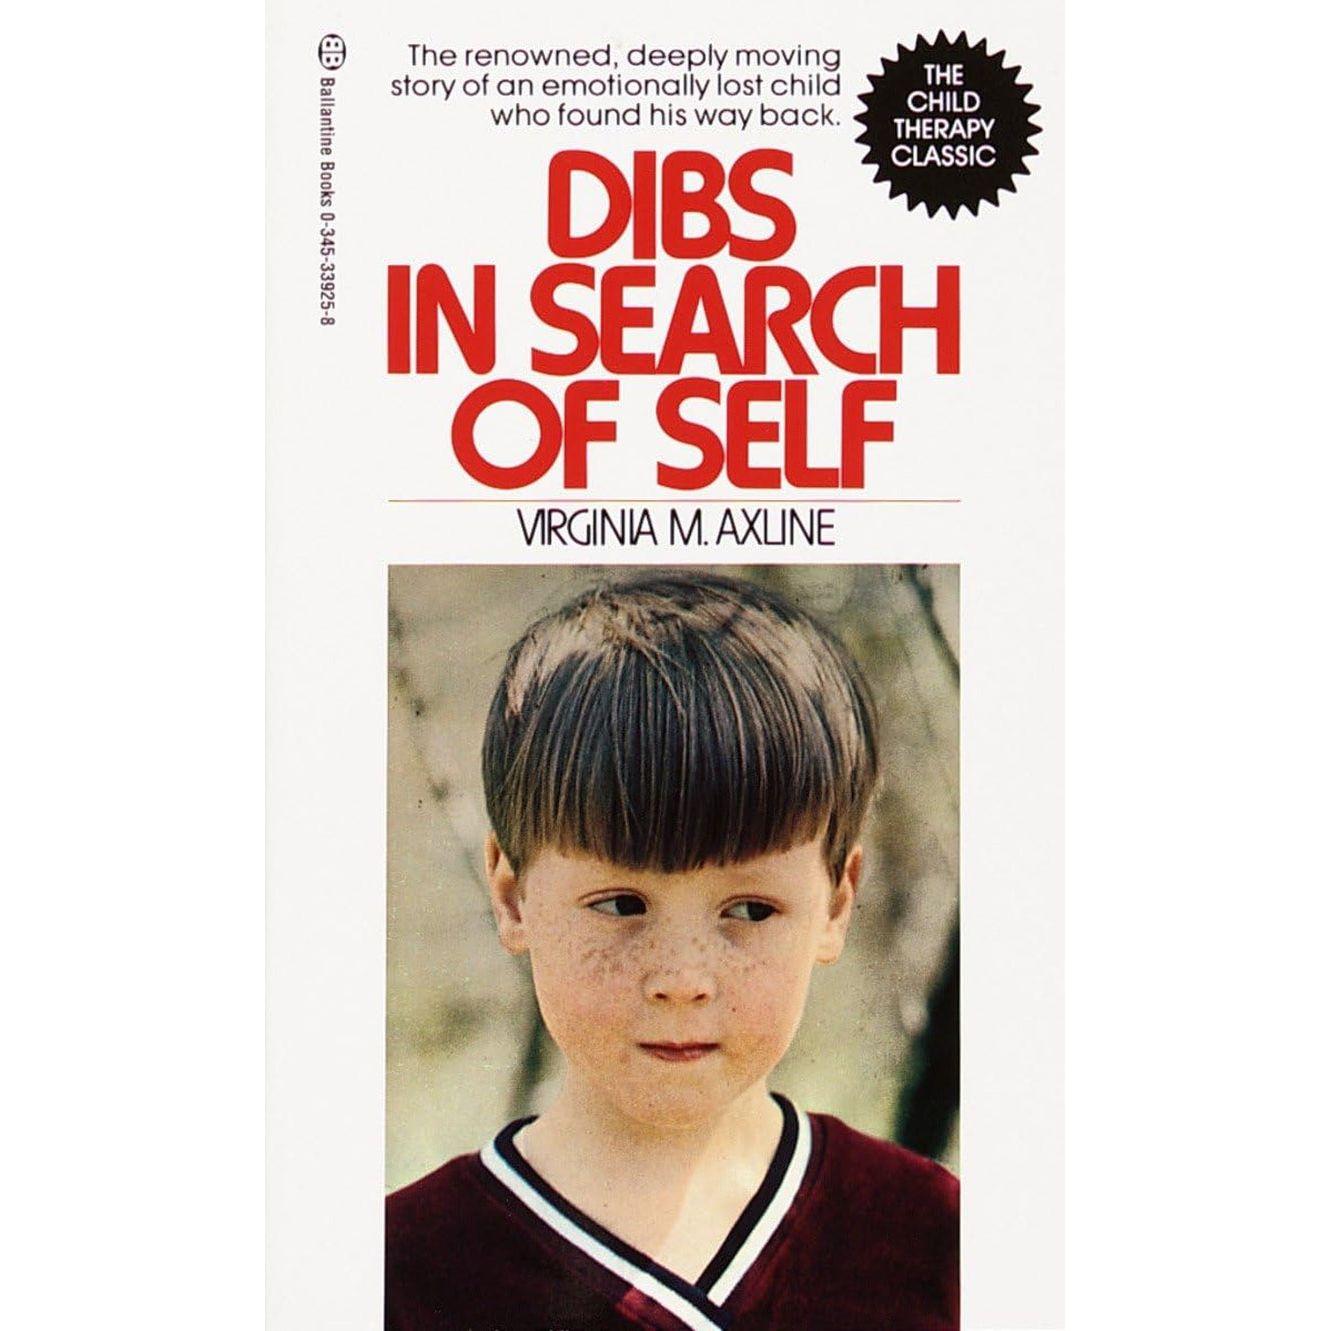 Dibs in Search of Self: the Renowned, Deeply Moving Story of an Emotionally Lost Child Who Found His Way Back